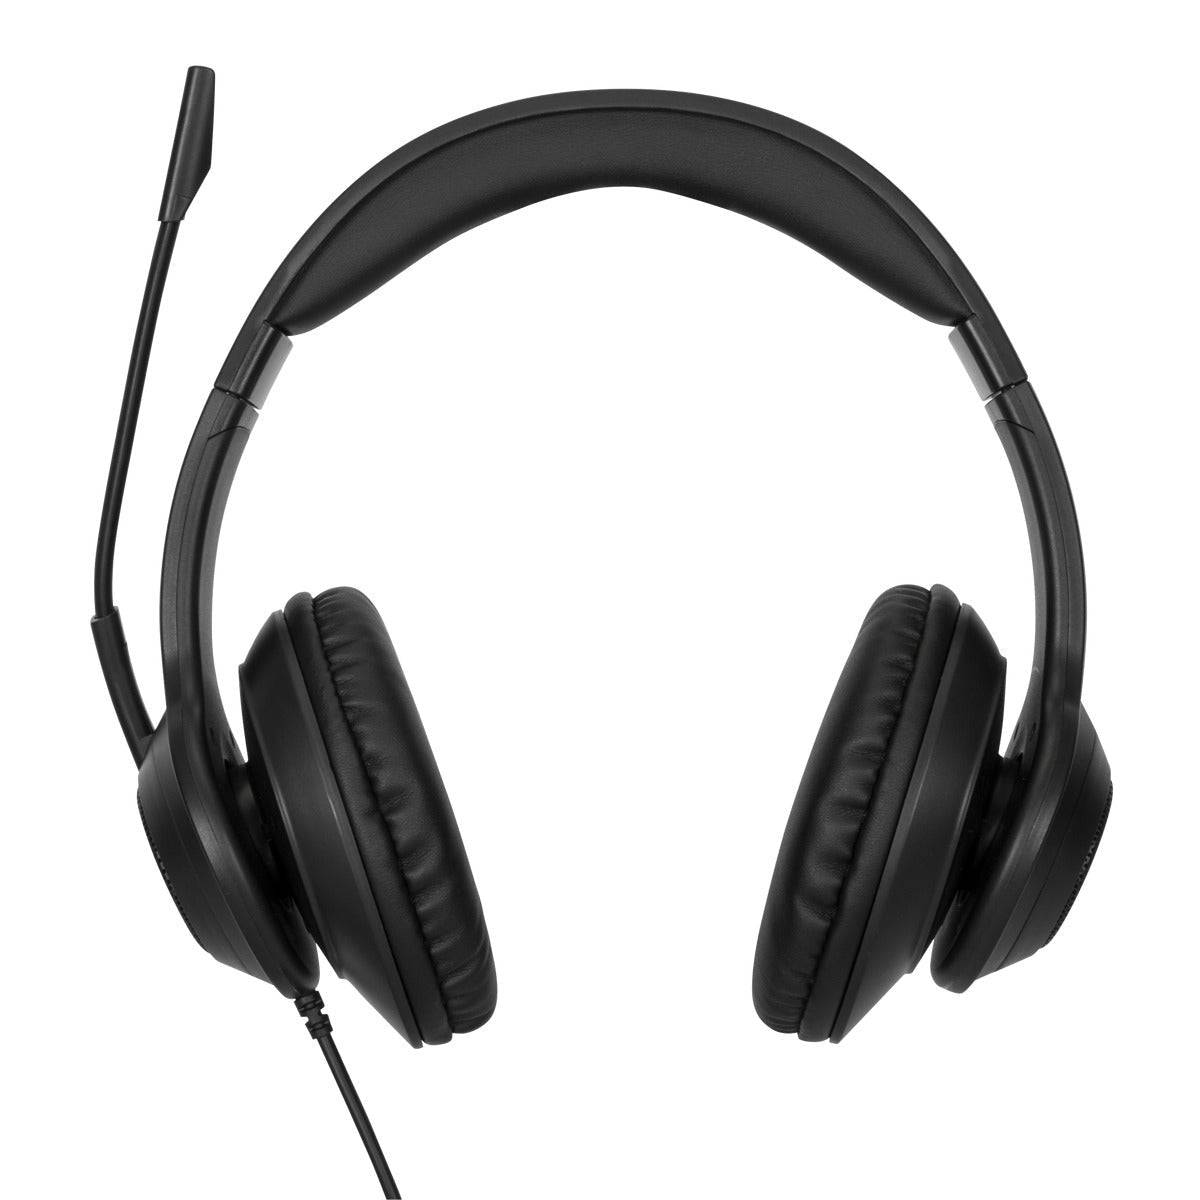 Rca Informatique - Image du produit : WIRED STEREO HEADSET